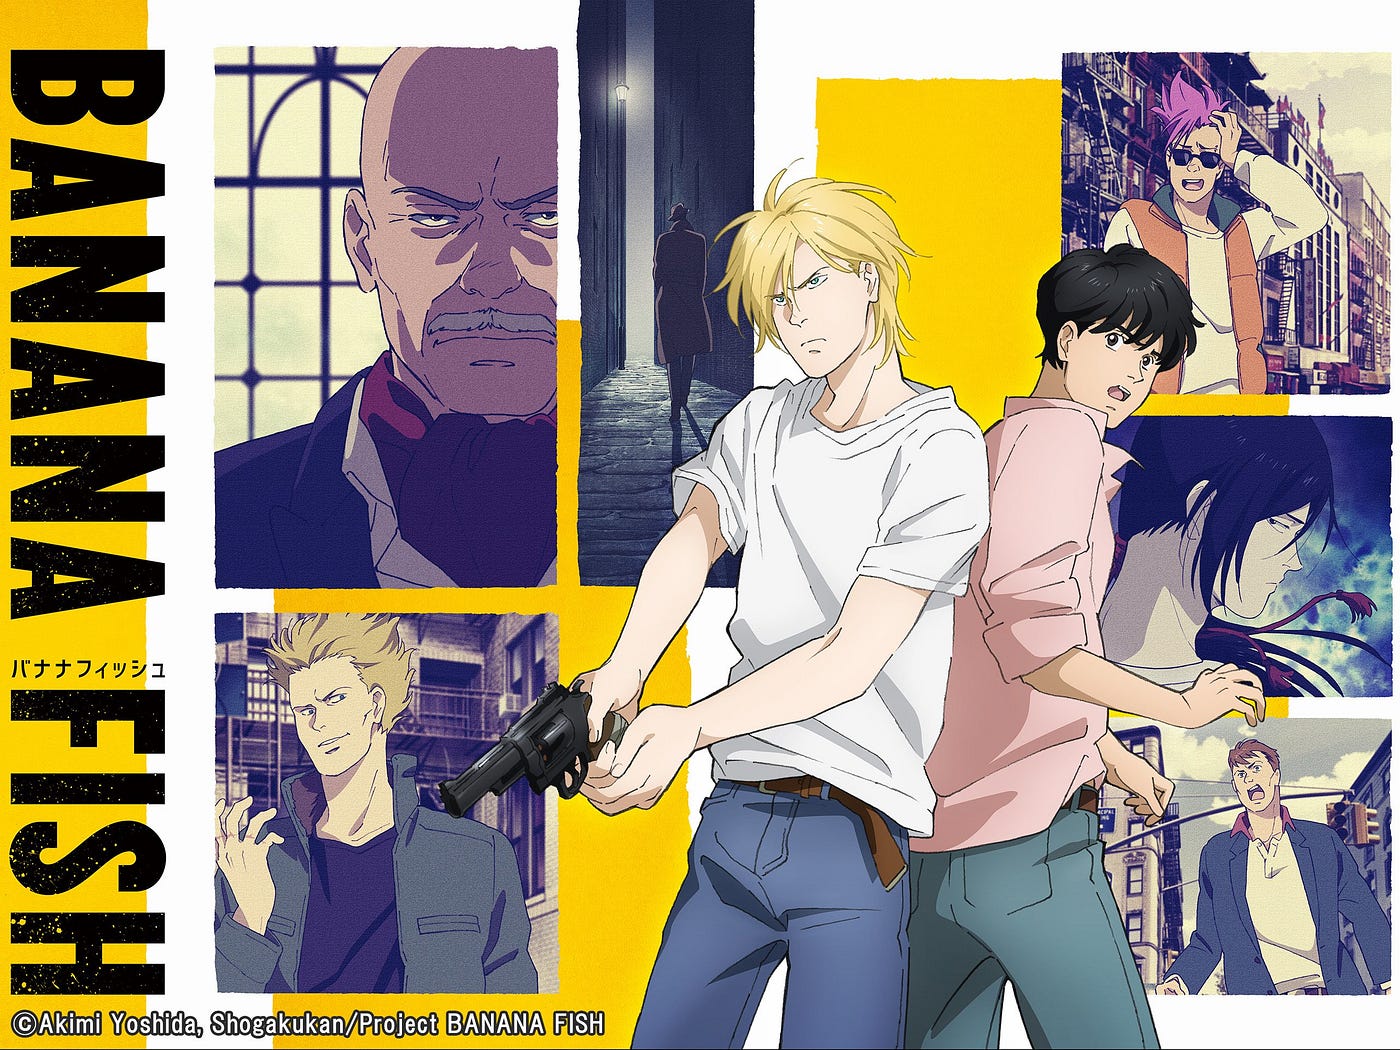 This question is off topic regarding Banana Fish, but recently I've been  diagnosed with myopa and need to use glasses and would love to buy Ash's.  Do you know any brand similar